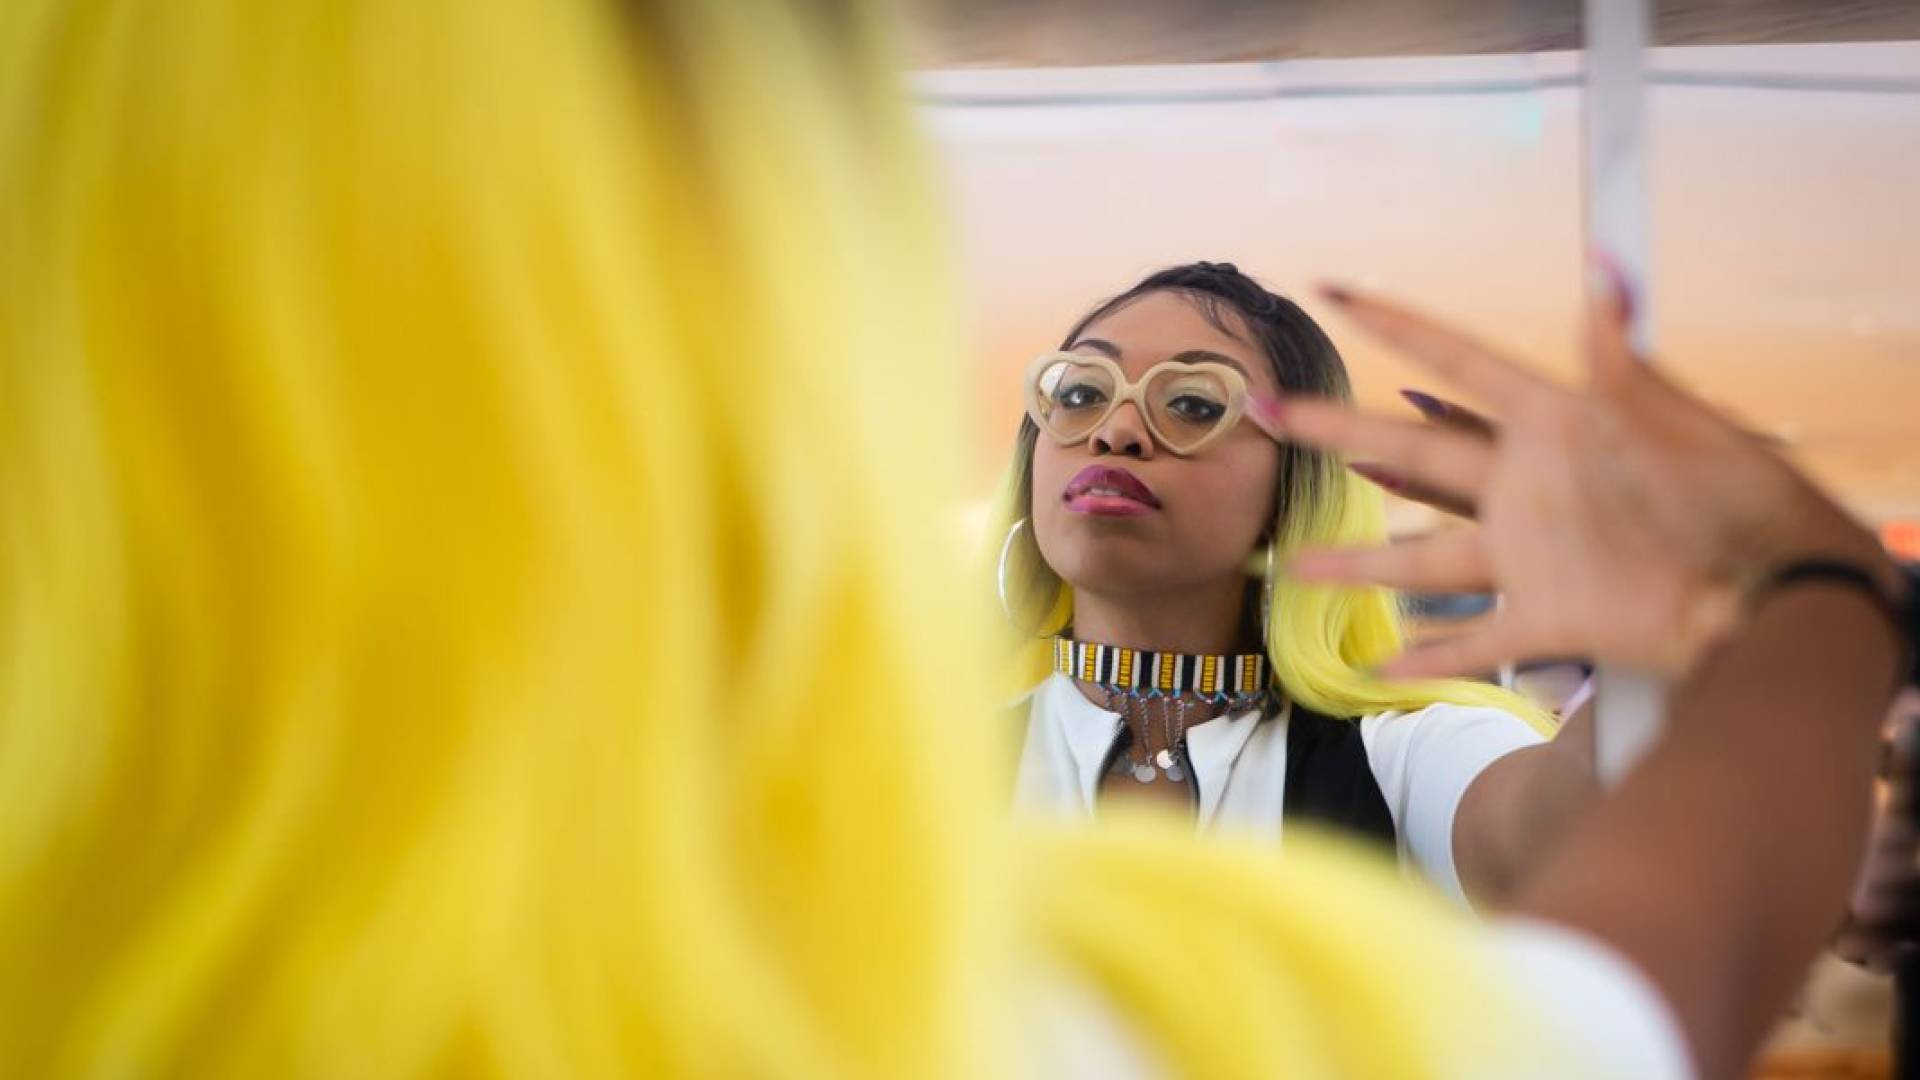 woman with yellow hair and glasses looks at herself in mirror with hand on glass